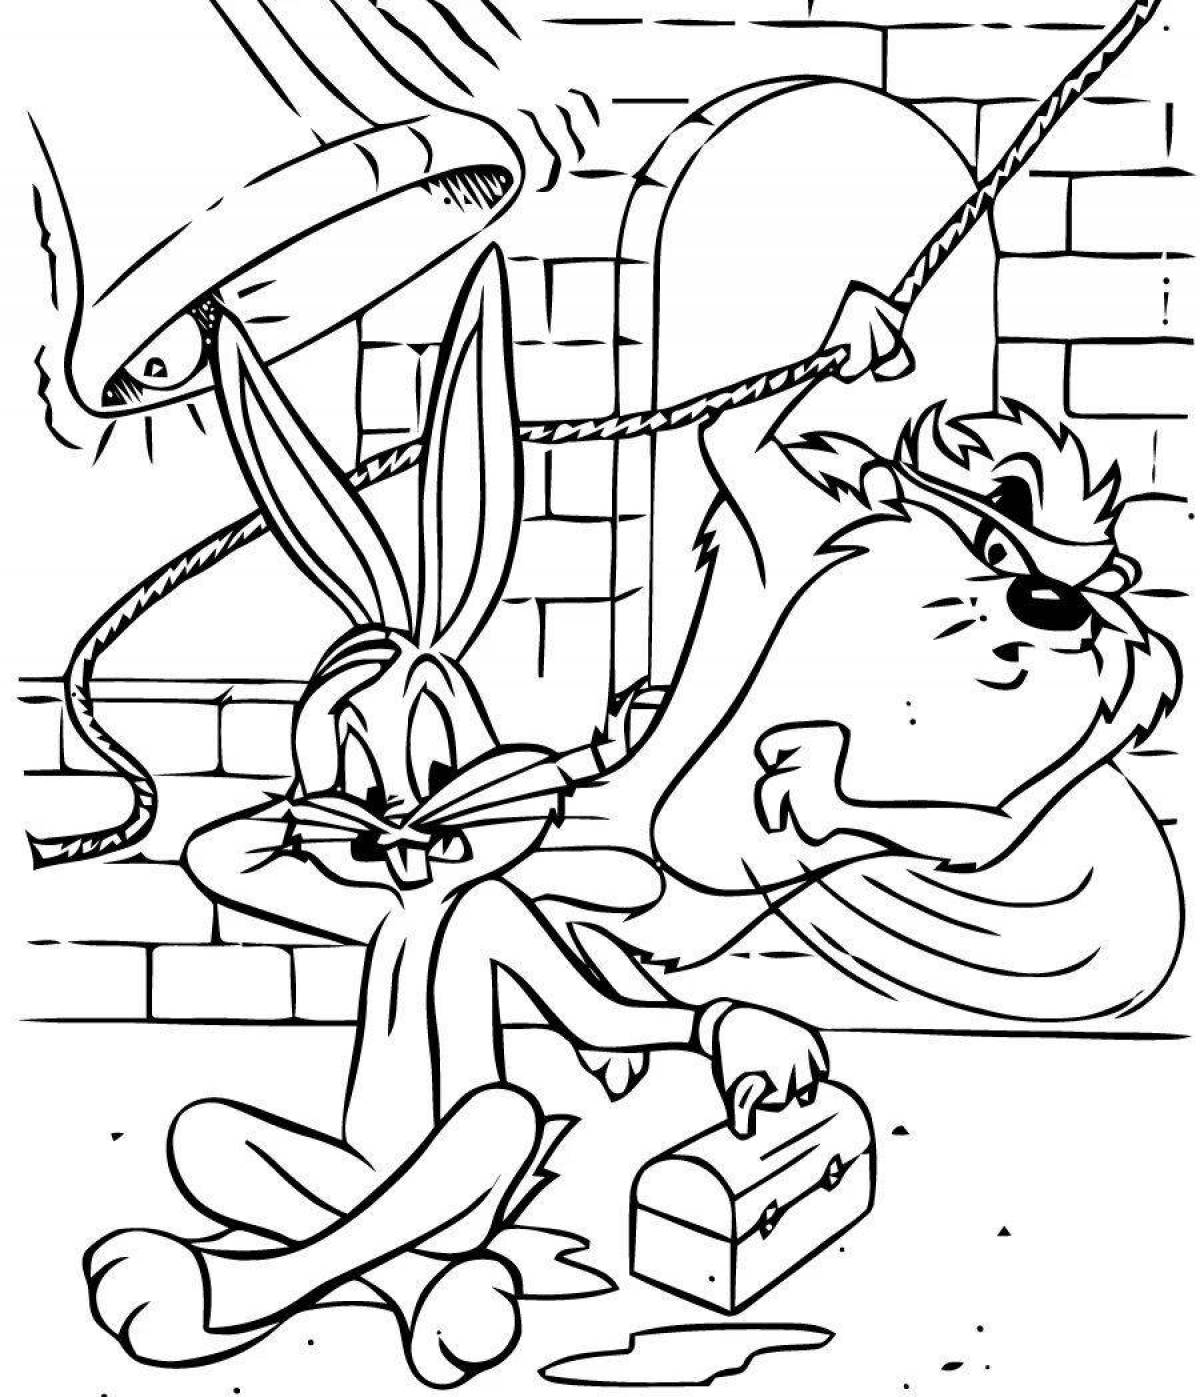 Wiggly coloring page bunny bugs